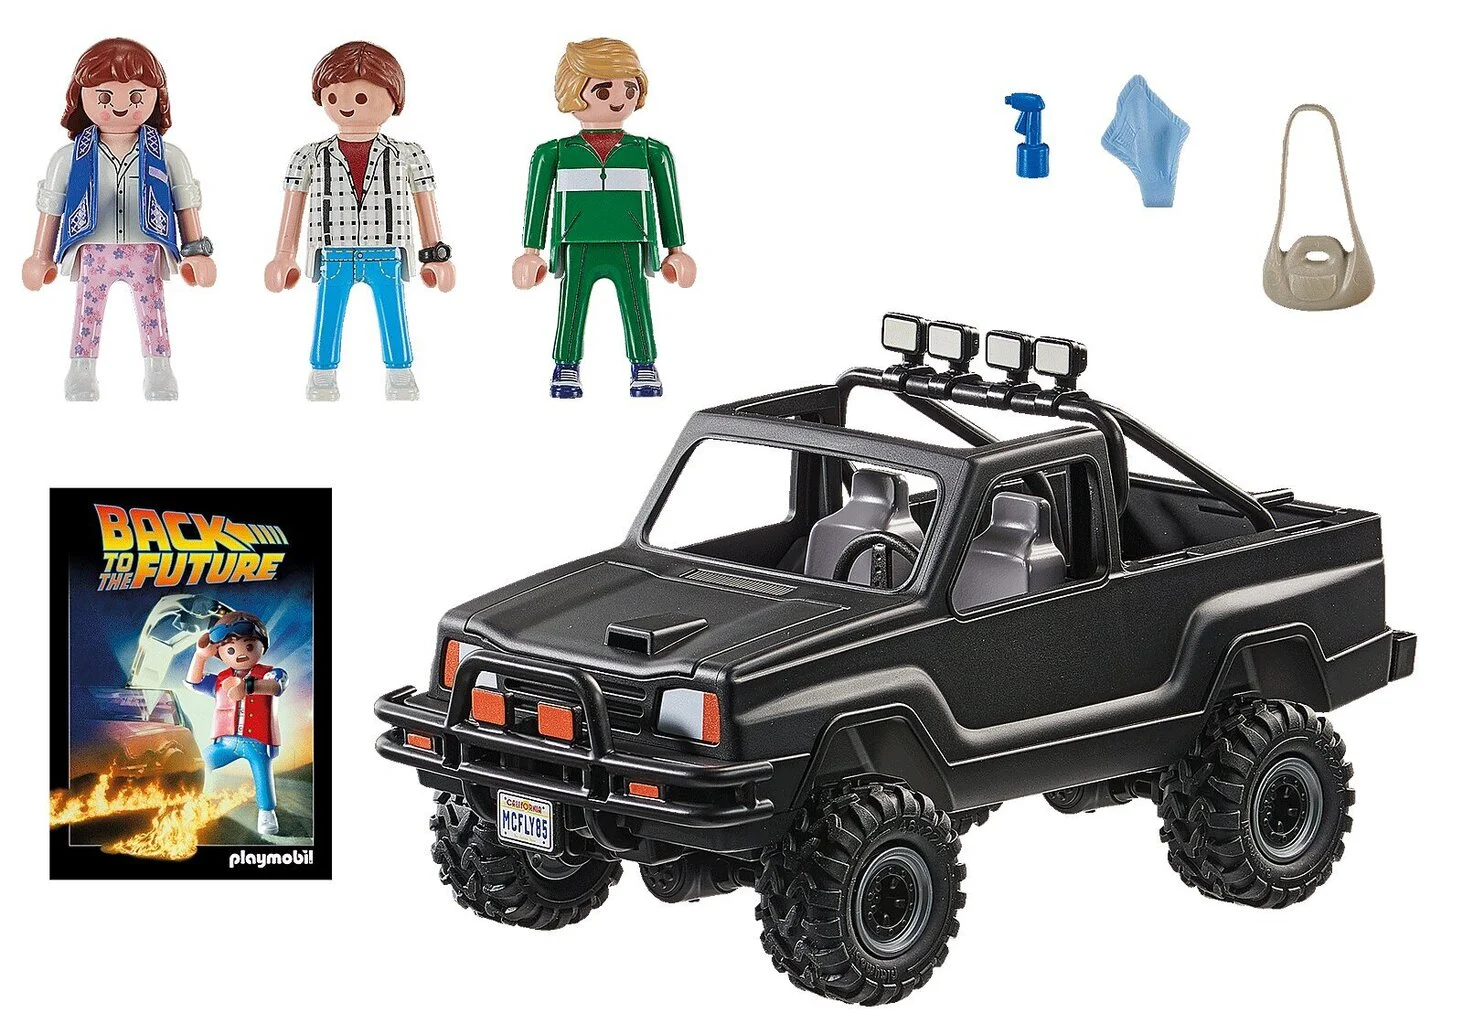 70633-playmobil-back-to-the-future-marty-kaina_reference